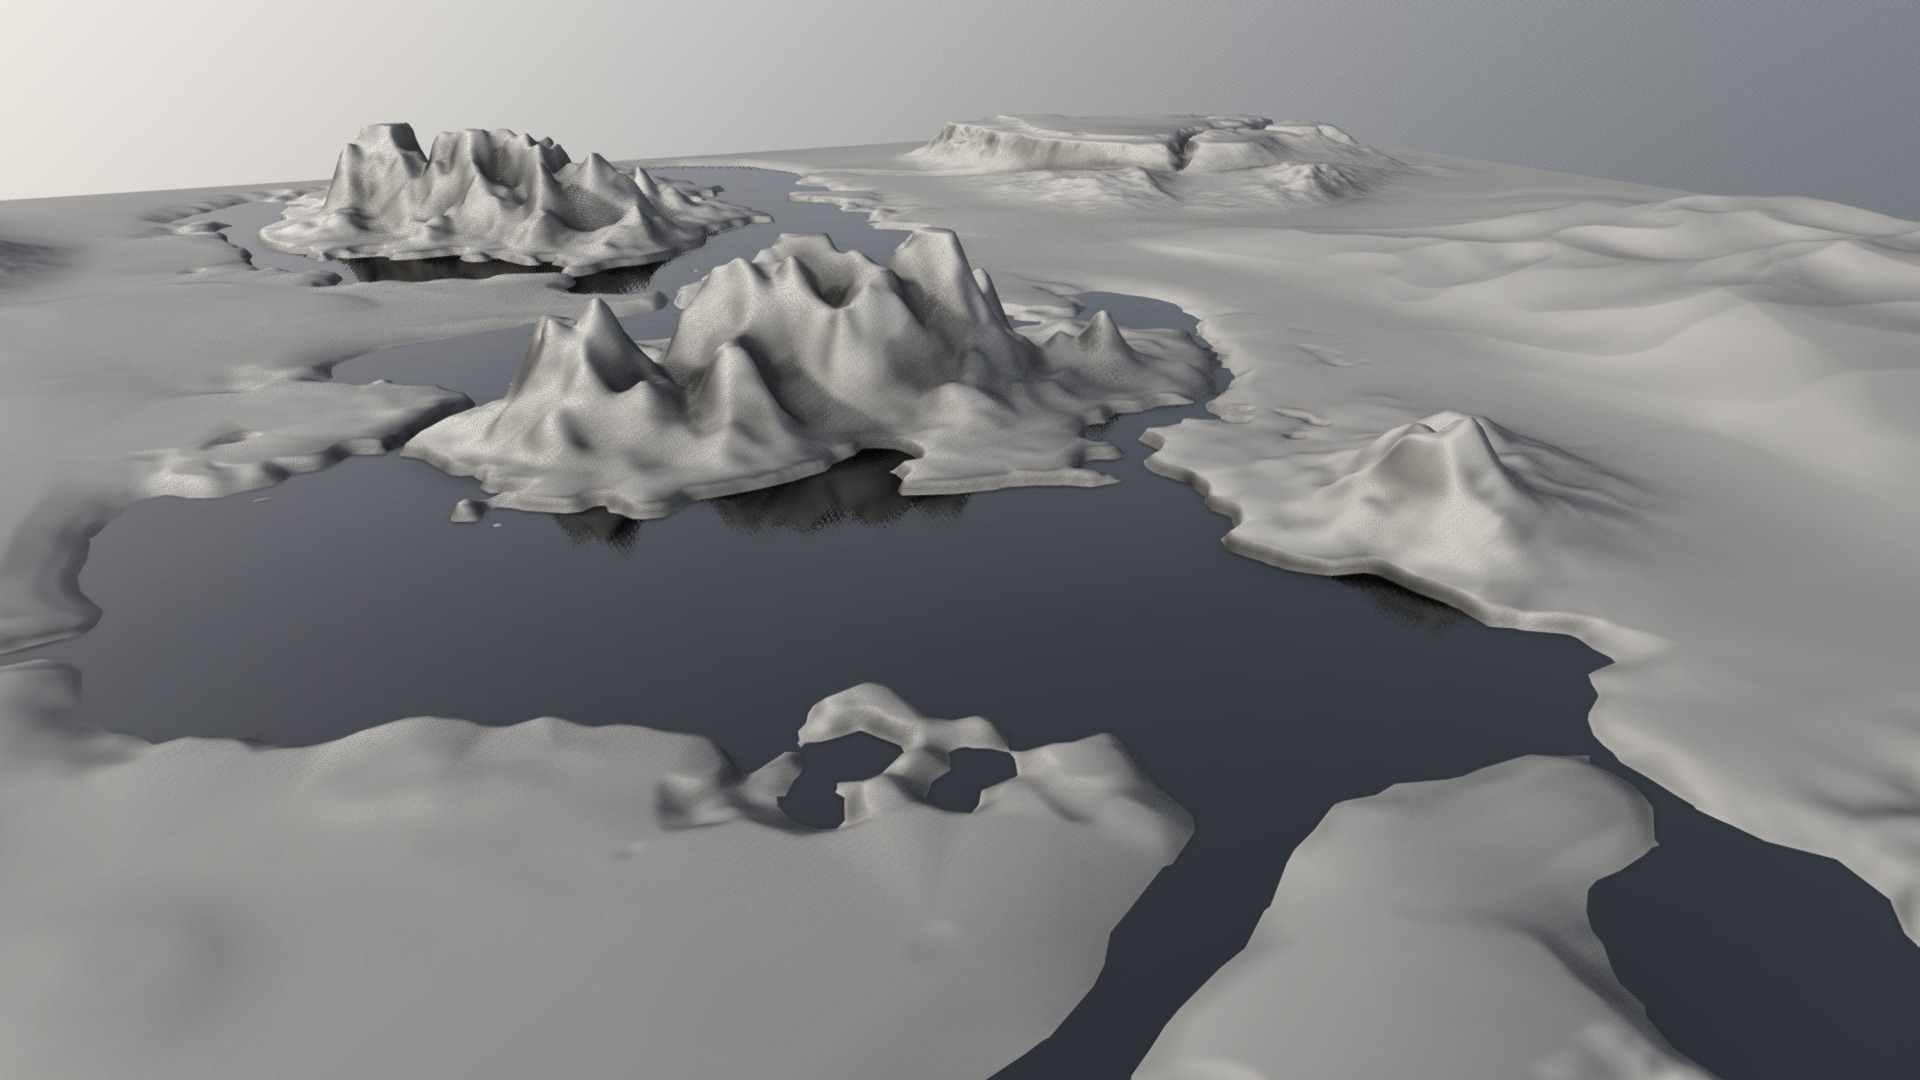 3D model Winter Environment / Test 1 - This is a 3D model of the Winter Environment / Test 1. The 3D model is about icebergs in the water.